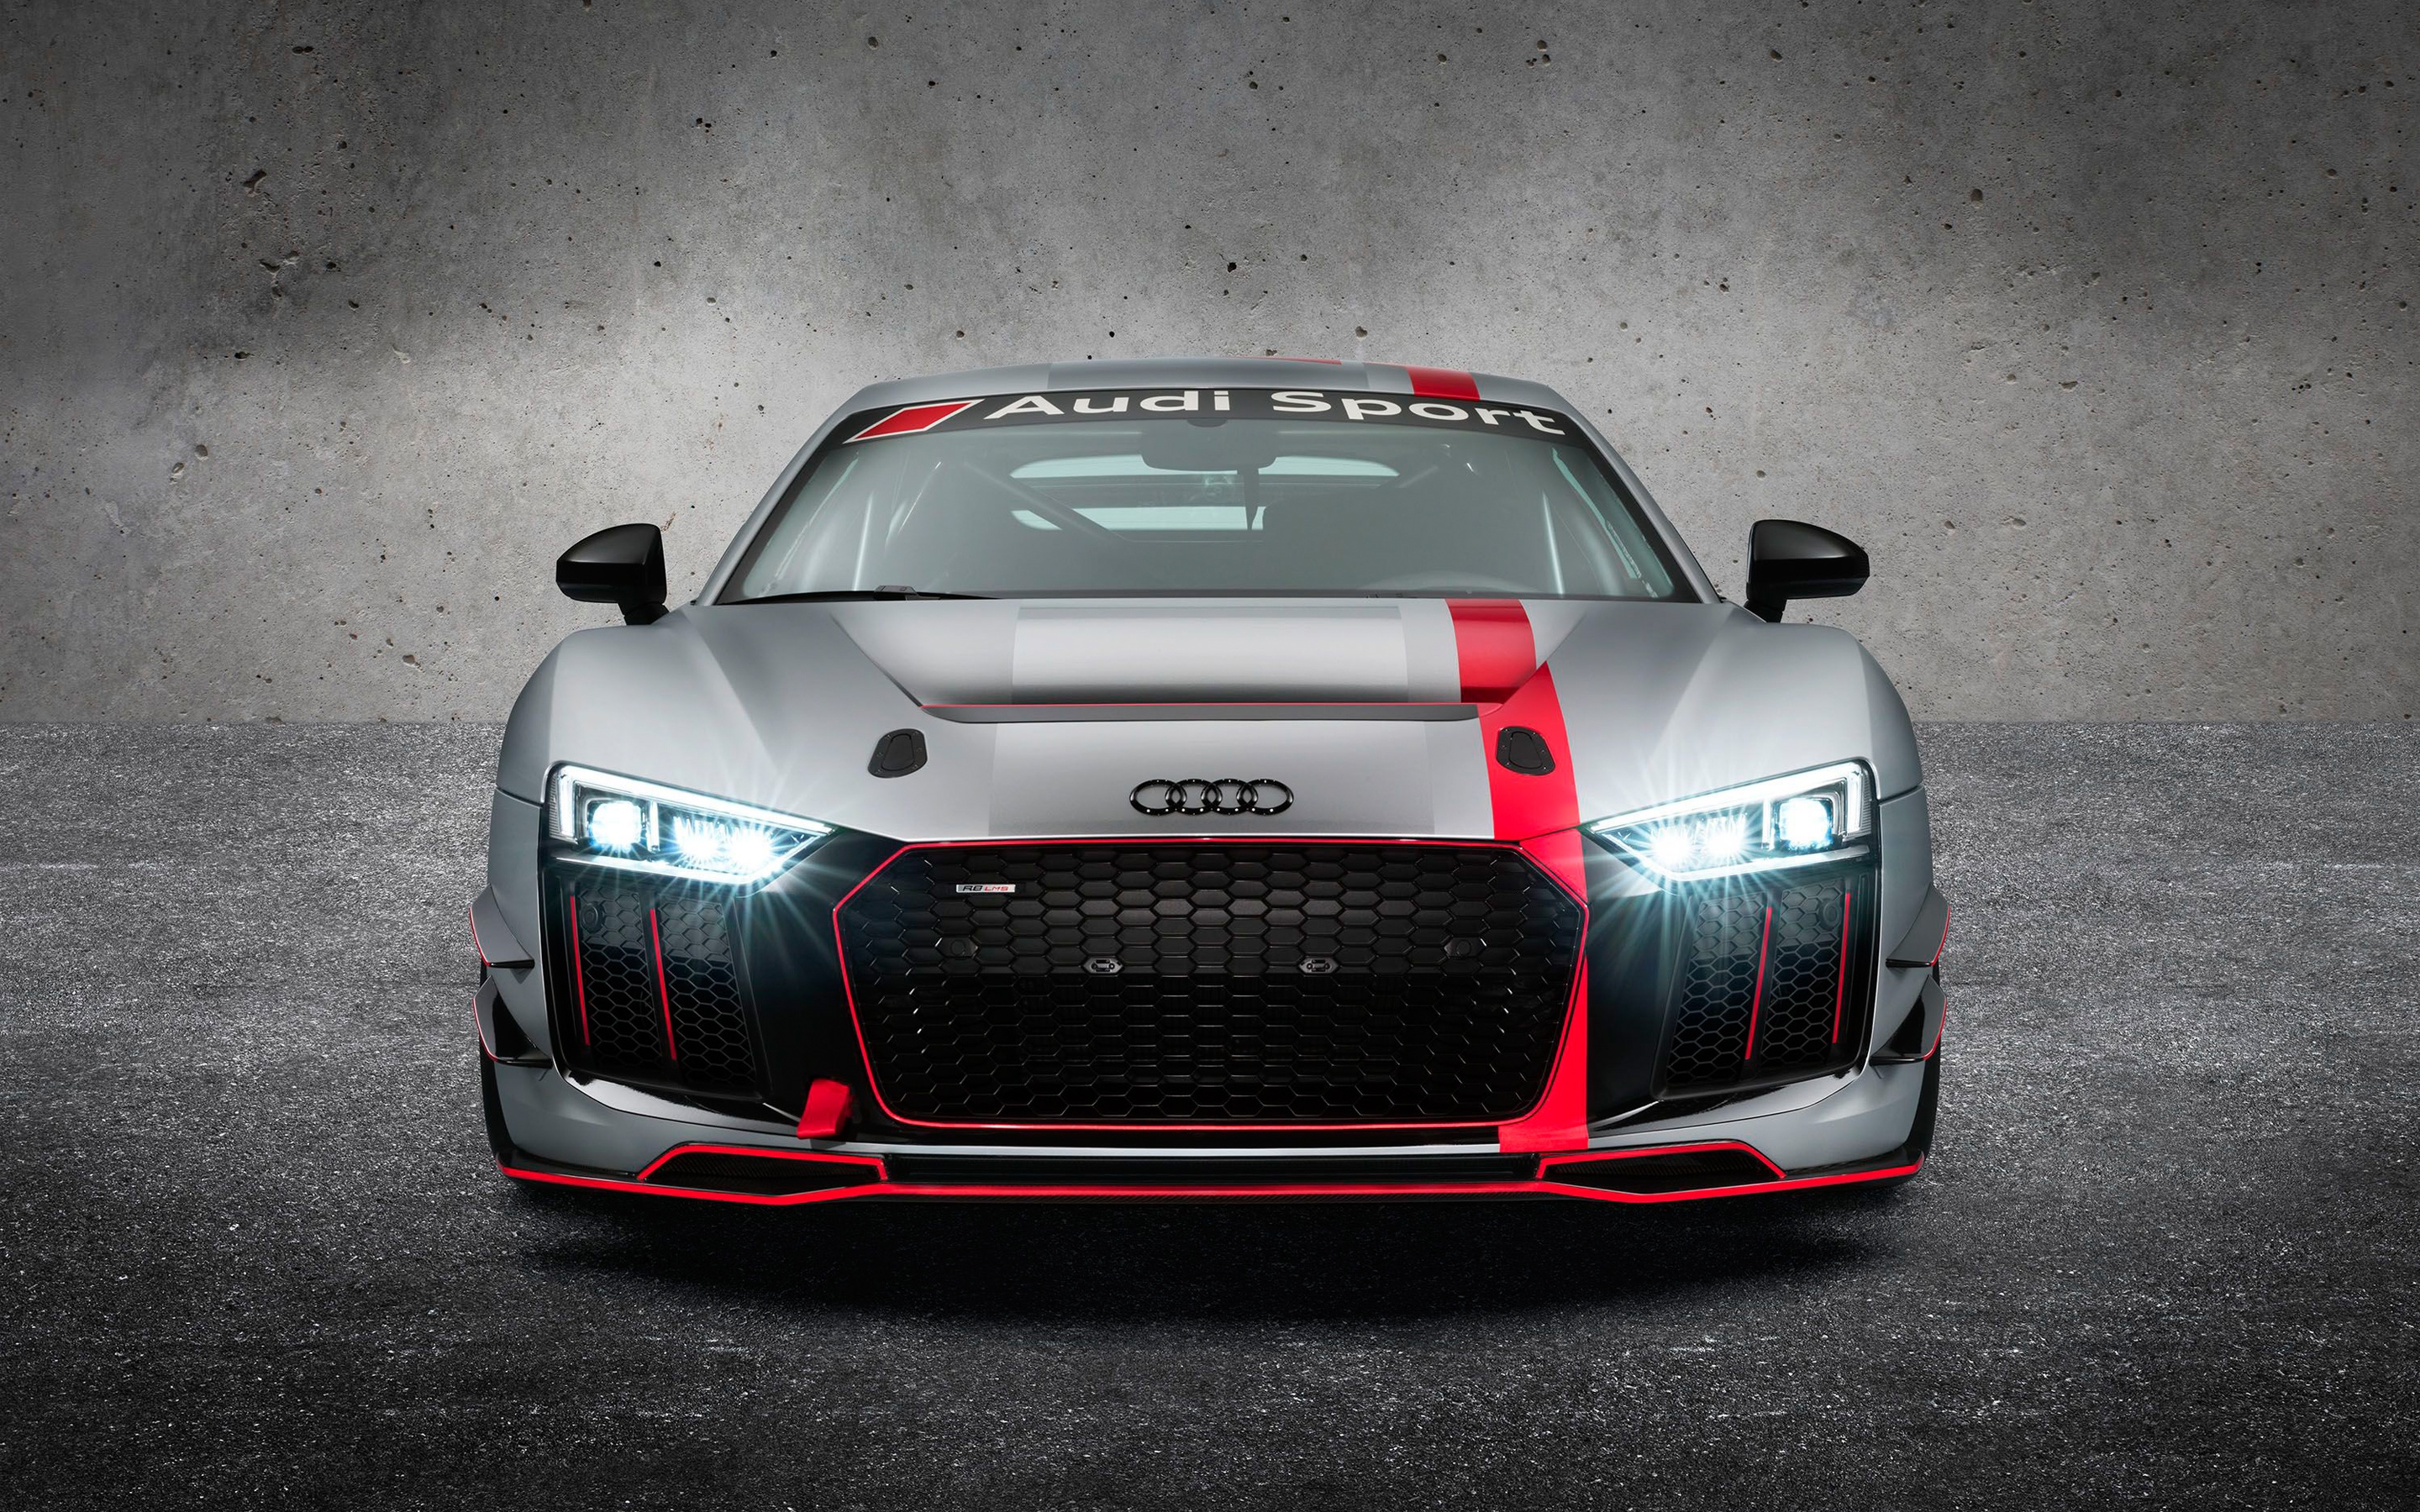 Photo free wallpaper audi r8 lms gt4, view from front, cars